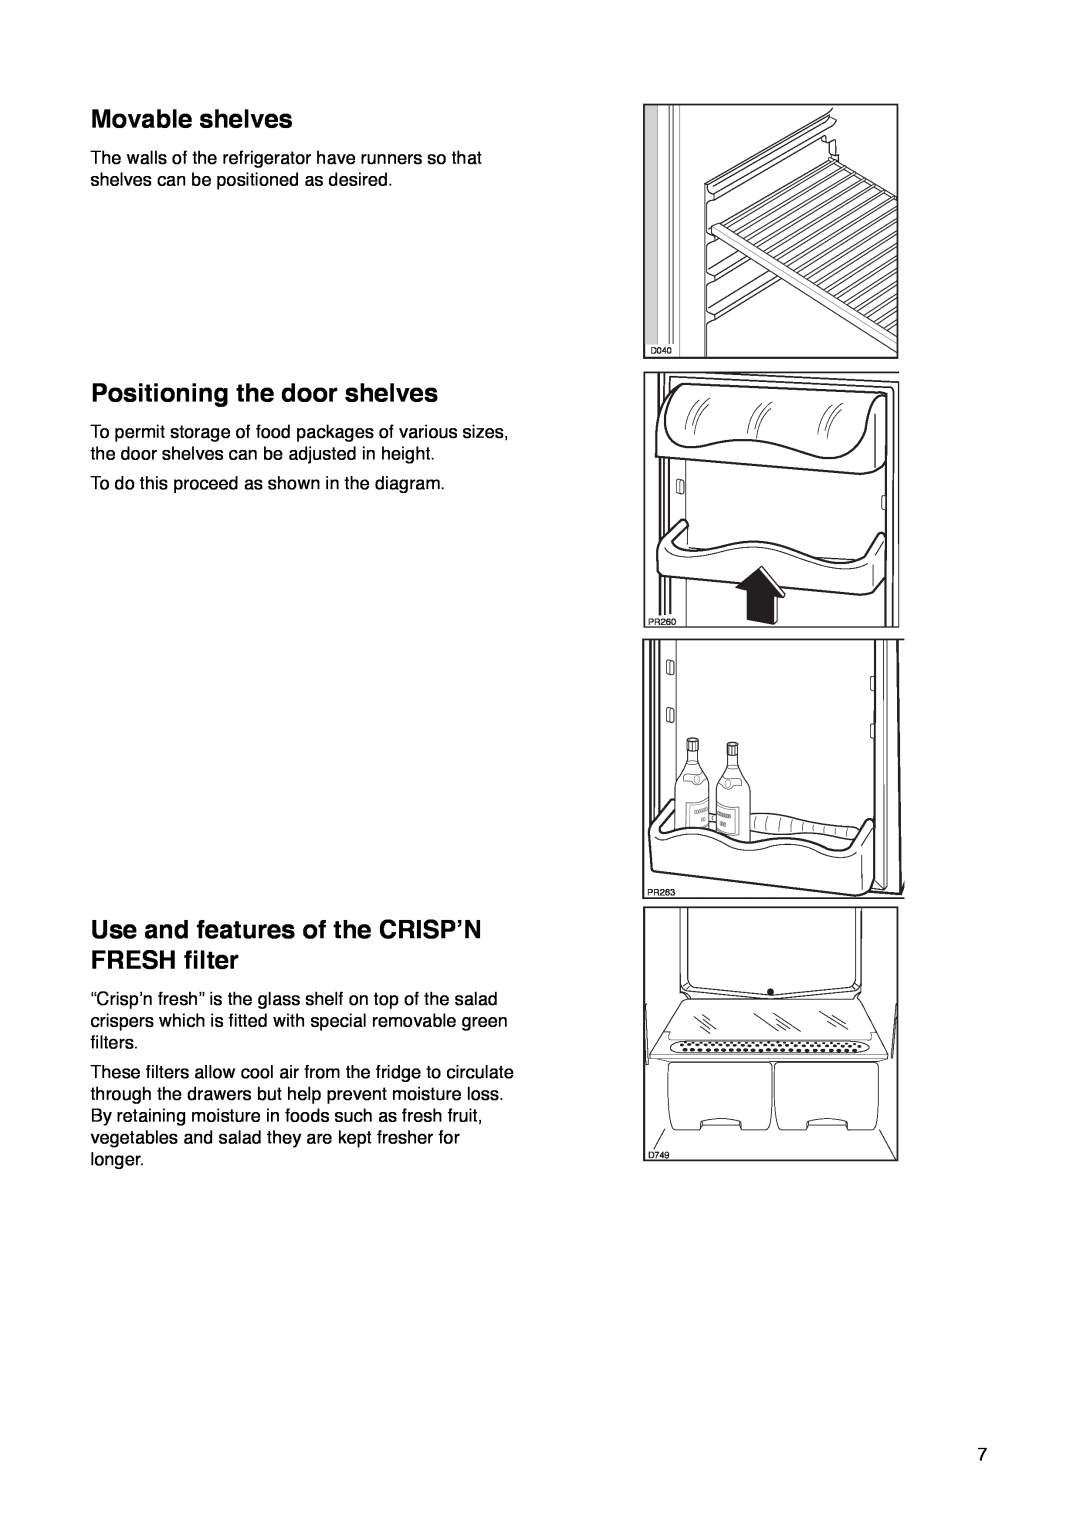 Zanussi ZK 61/27 R manual Movable shelves, Positioning the door shelves, Use and features of the CRISPÕN FRESH filter 